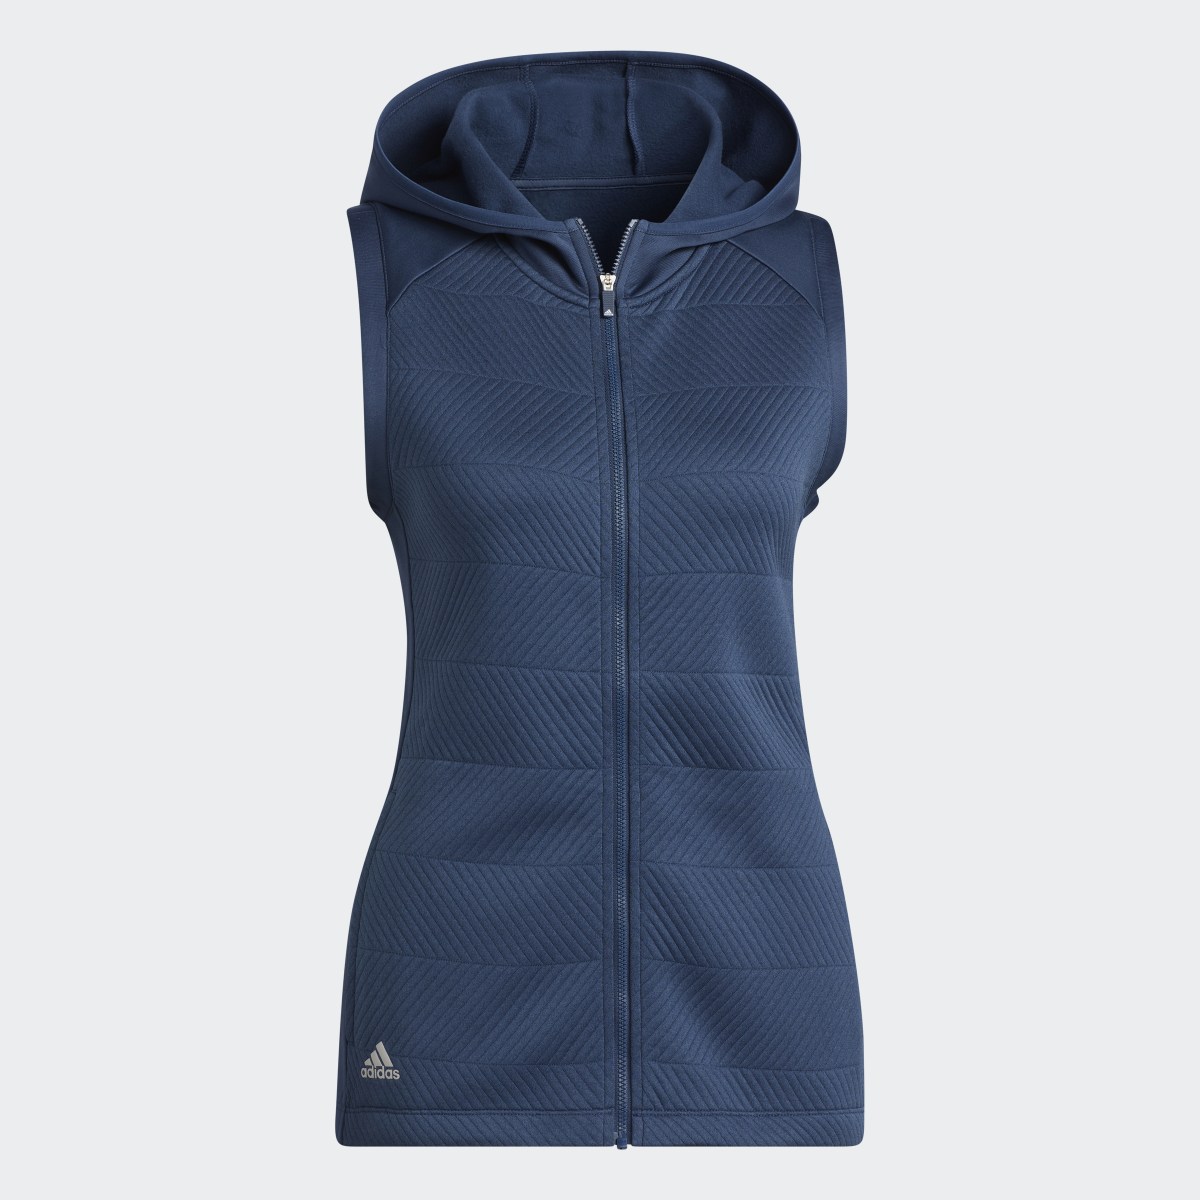 Adidas COLD.RDY Full-Zip Vest. 5